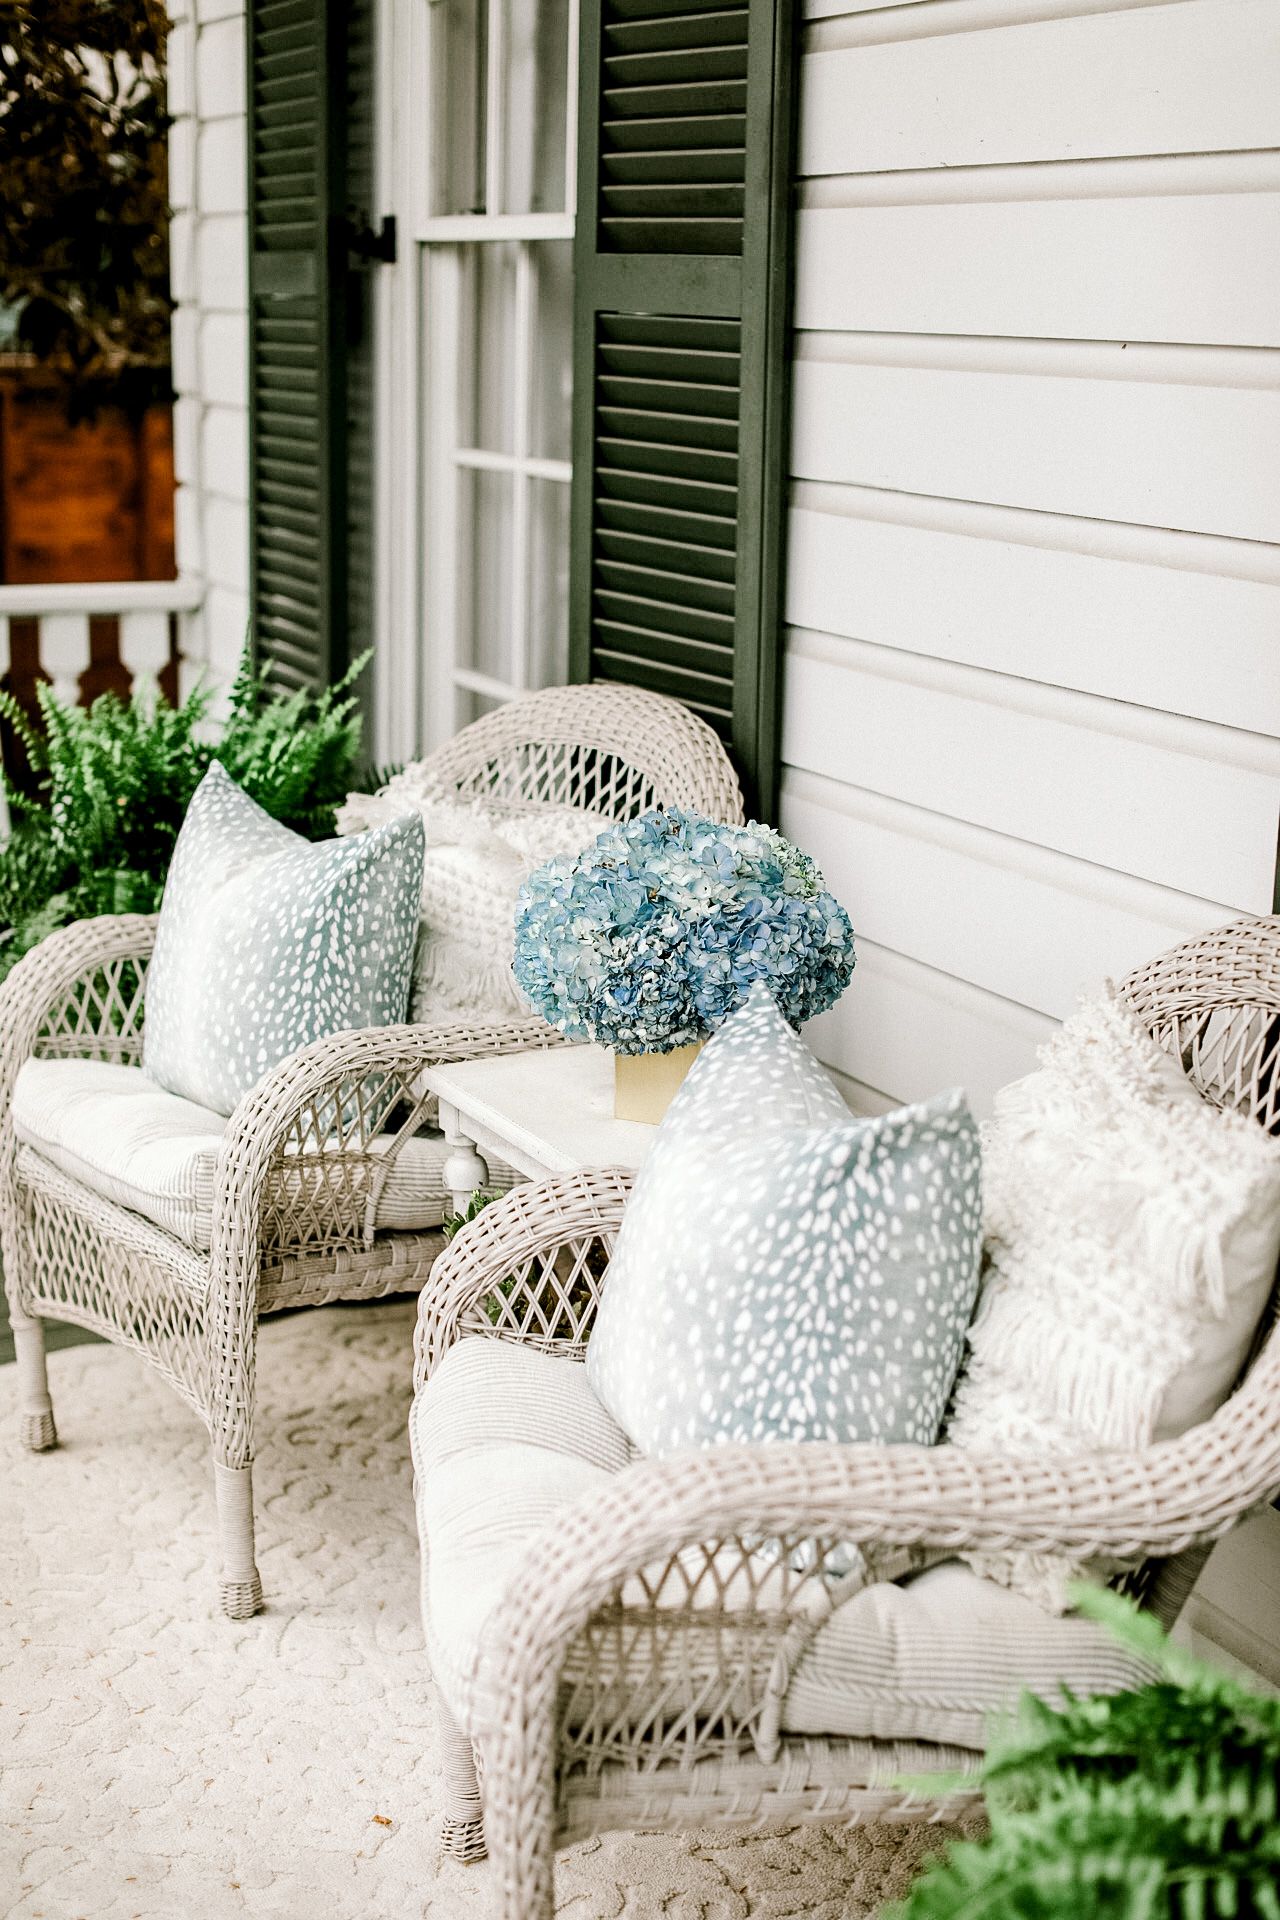 Using Outdoor Wicker Chairs